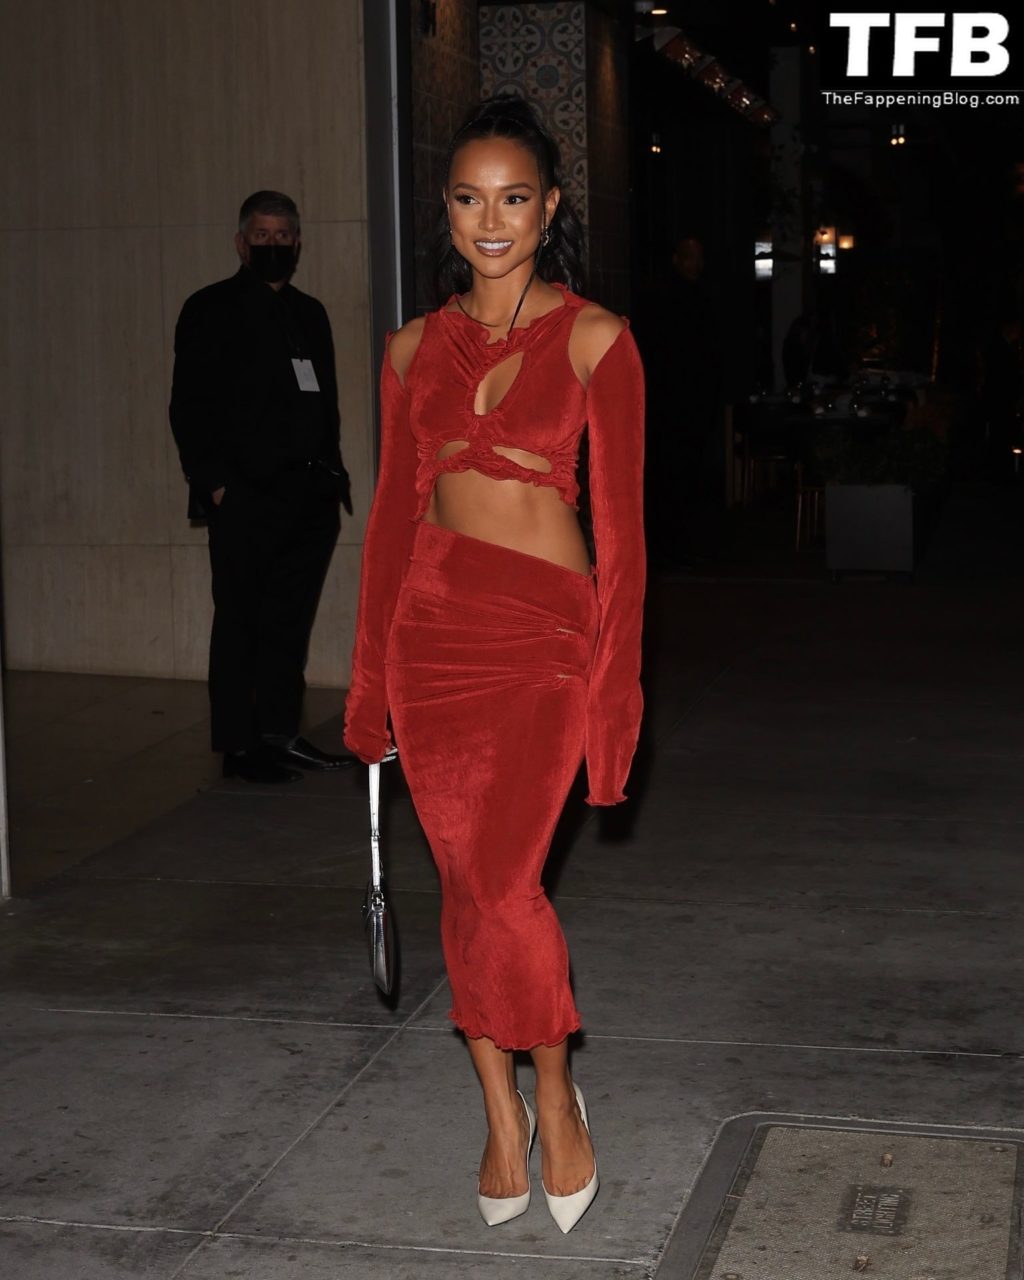 Karrueche Tran Sexy The Fappening Blog 4 1 1024x1280 - Karrueche Tran Shows Her Pokies in a Red Dress at The Hollywood Reporter’s Oscar Nominees Night (68 Photos)